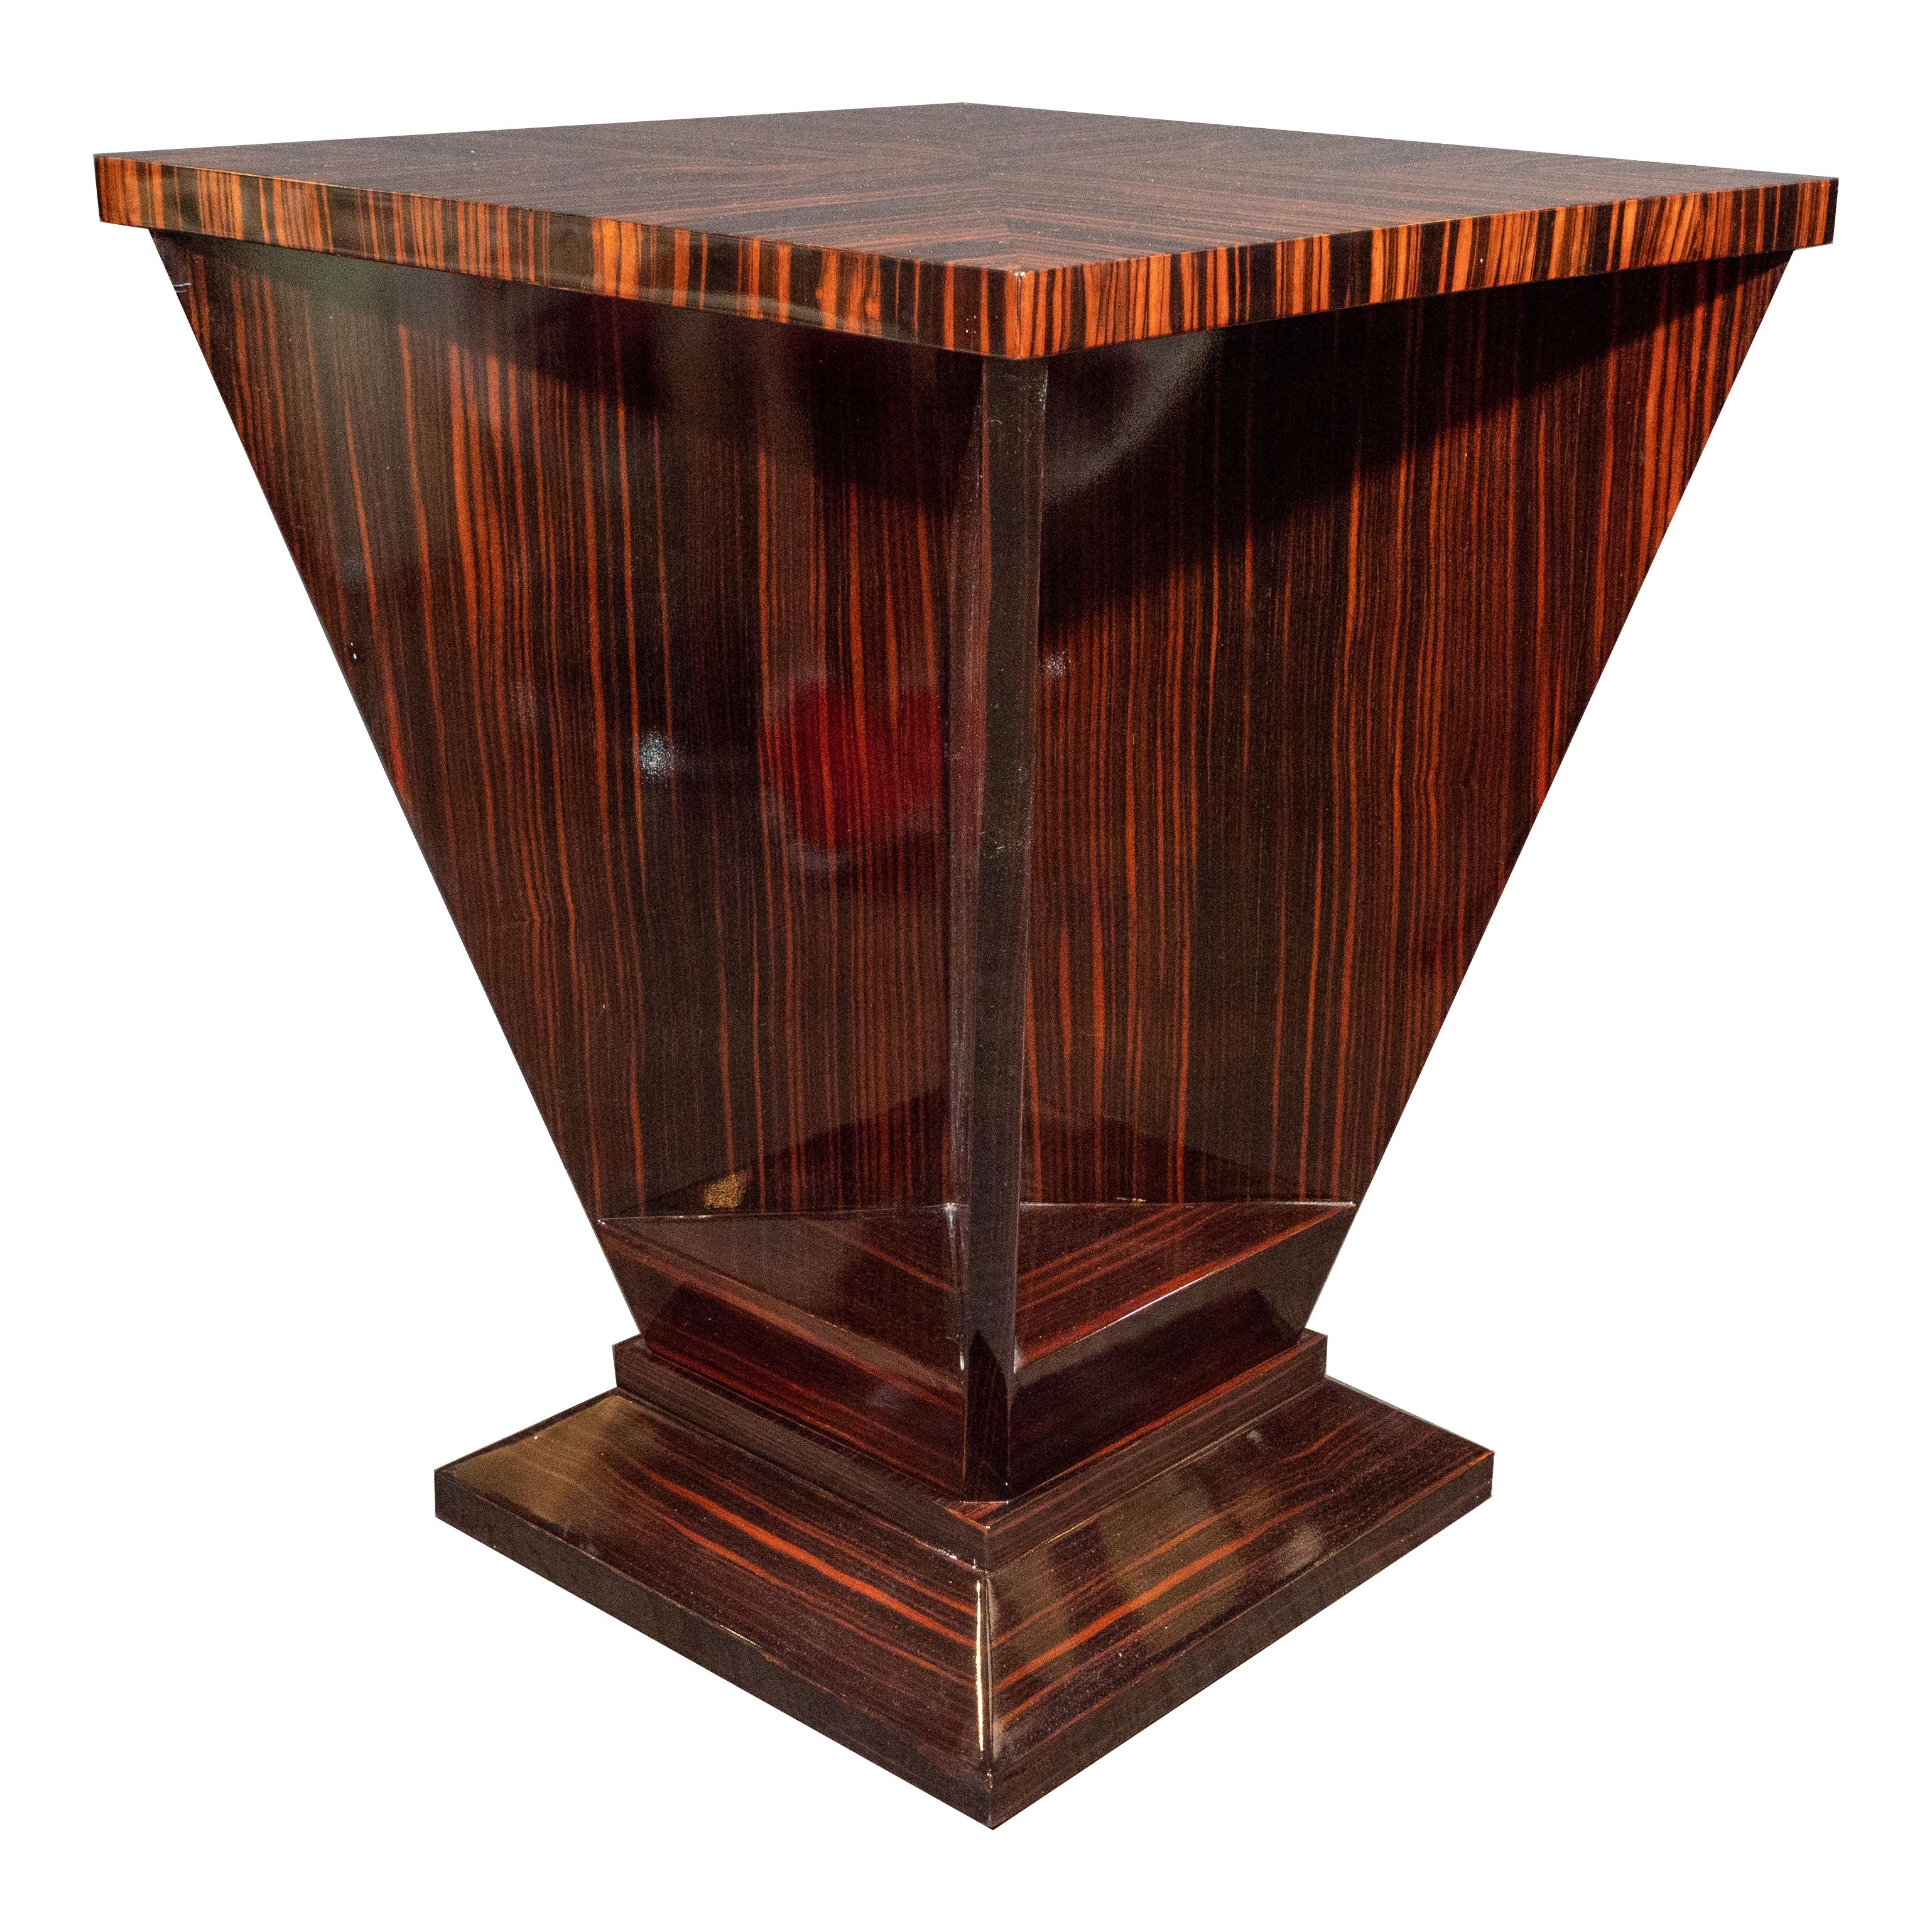 French Art Deco Cubist Occasional Table in Bookmatched Macassar